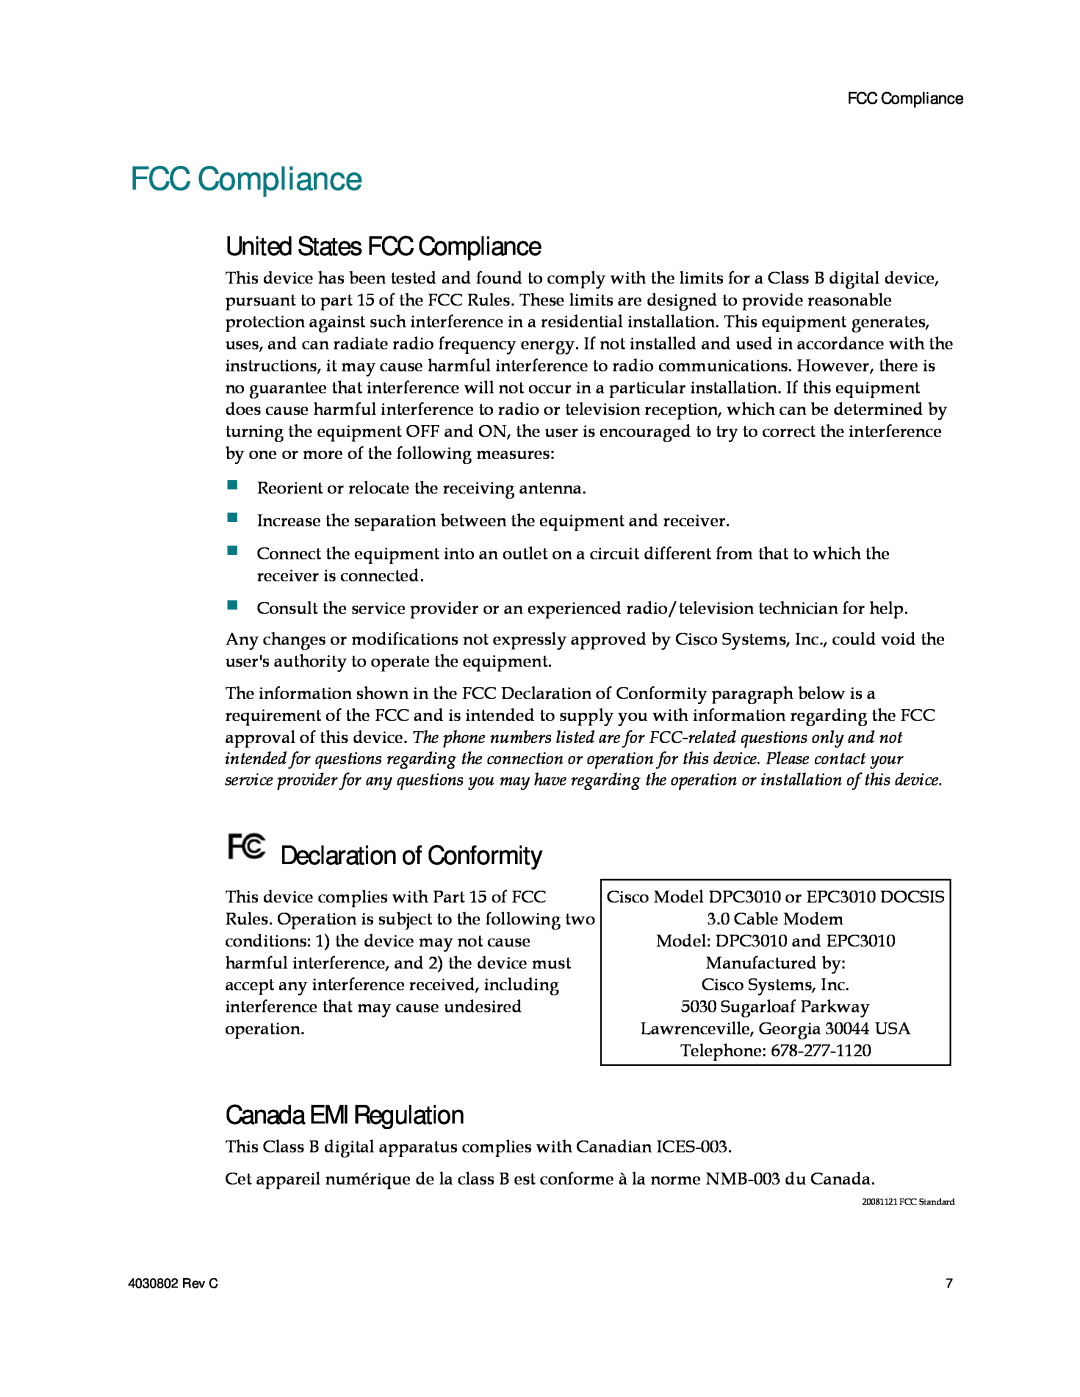 Cisco Systems AAC400210112234, 4027668 United States FCC Compliance, Declaration of Conformity, Canada EMI Regulation 